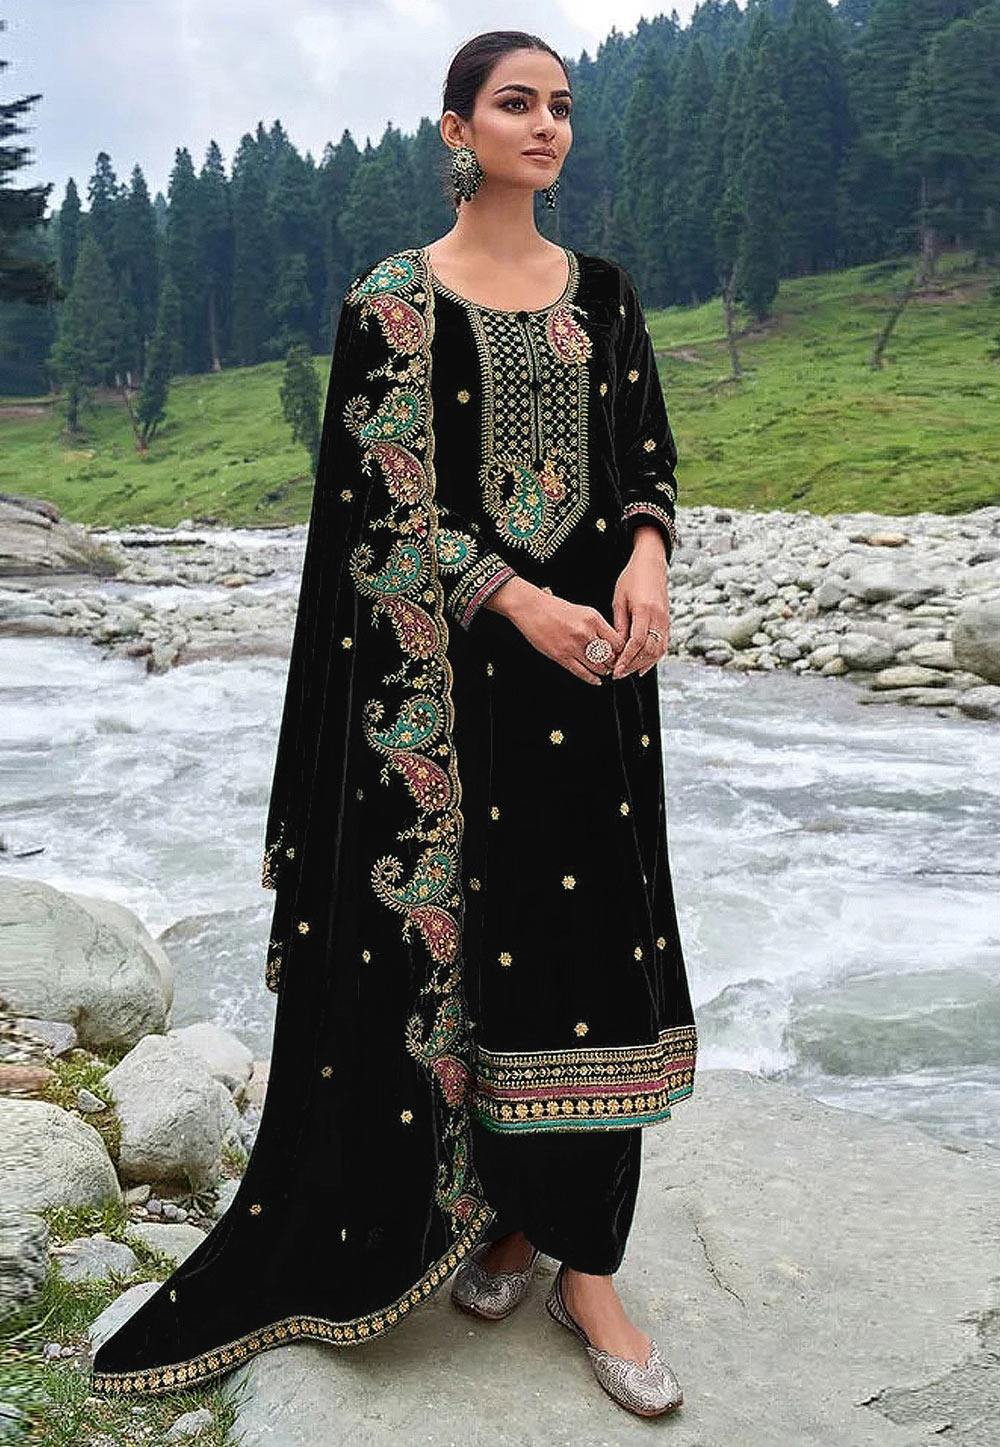 Black Salwar Suit with Gold Lace Border - Frontier Heritage